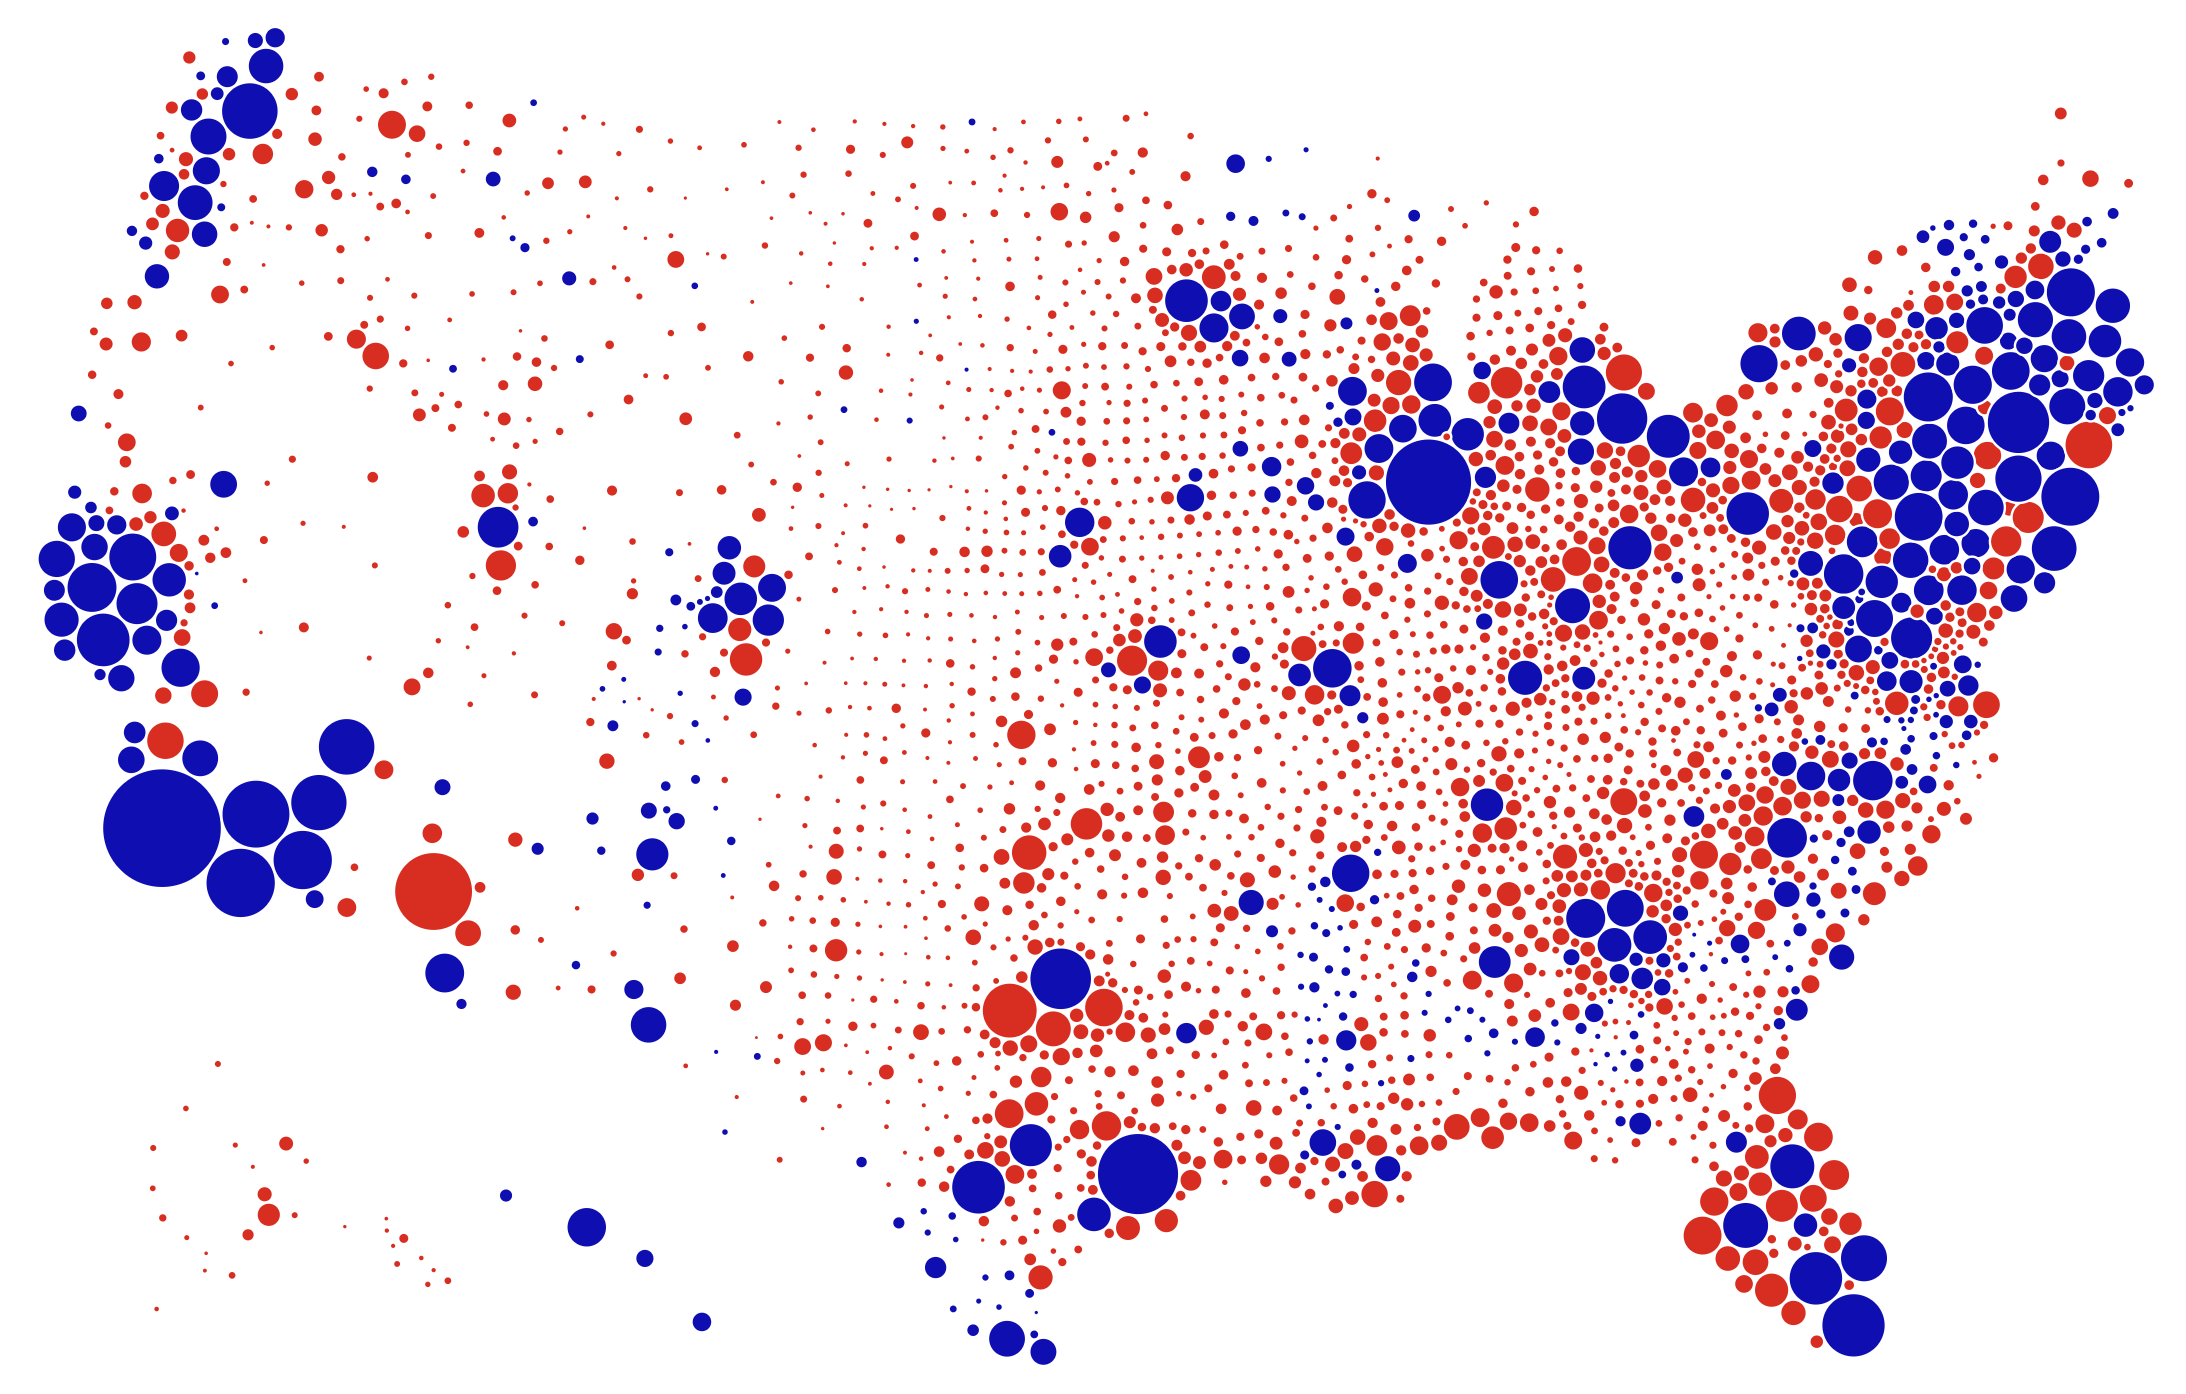 A bubble map showing blue and red counties